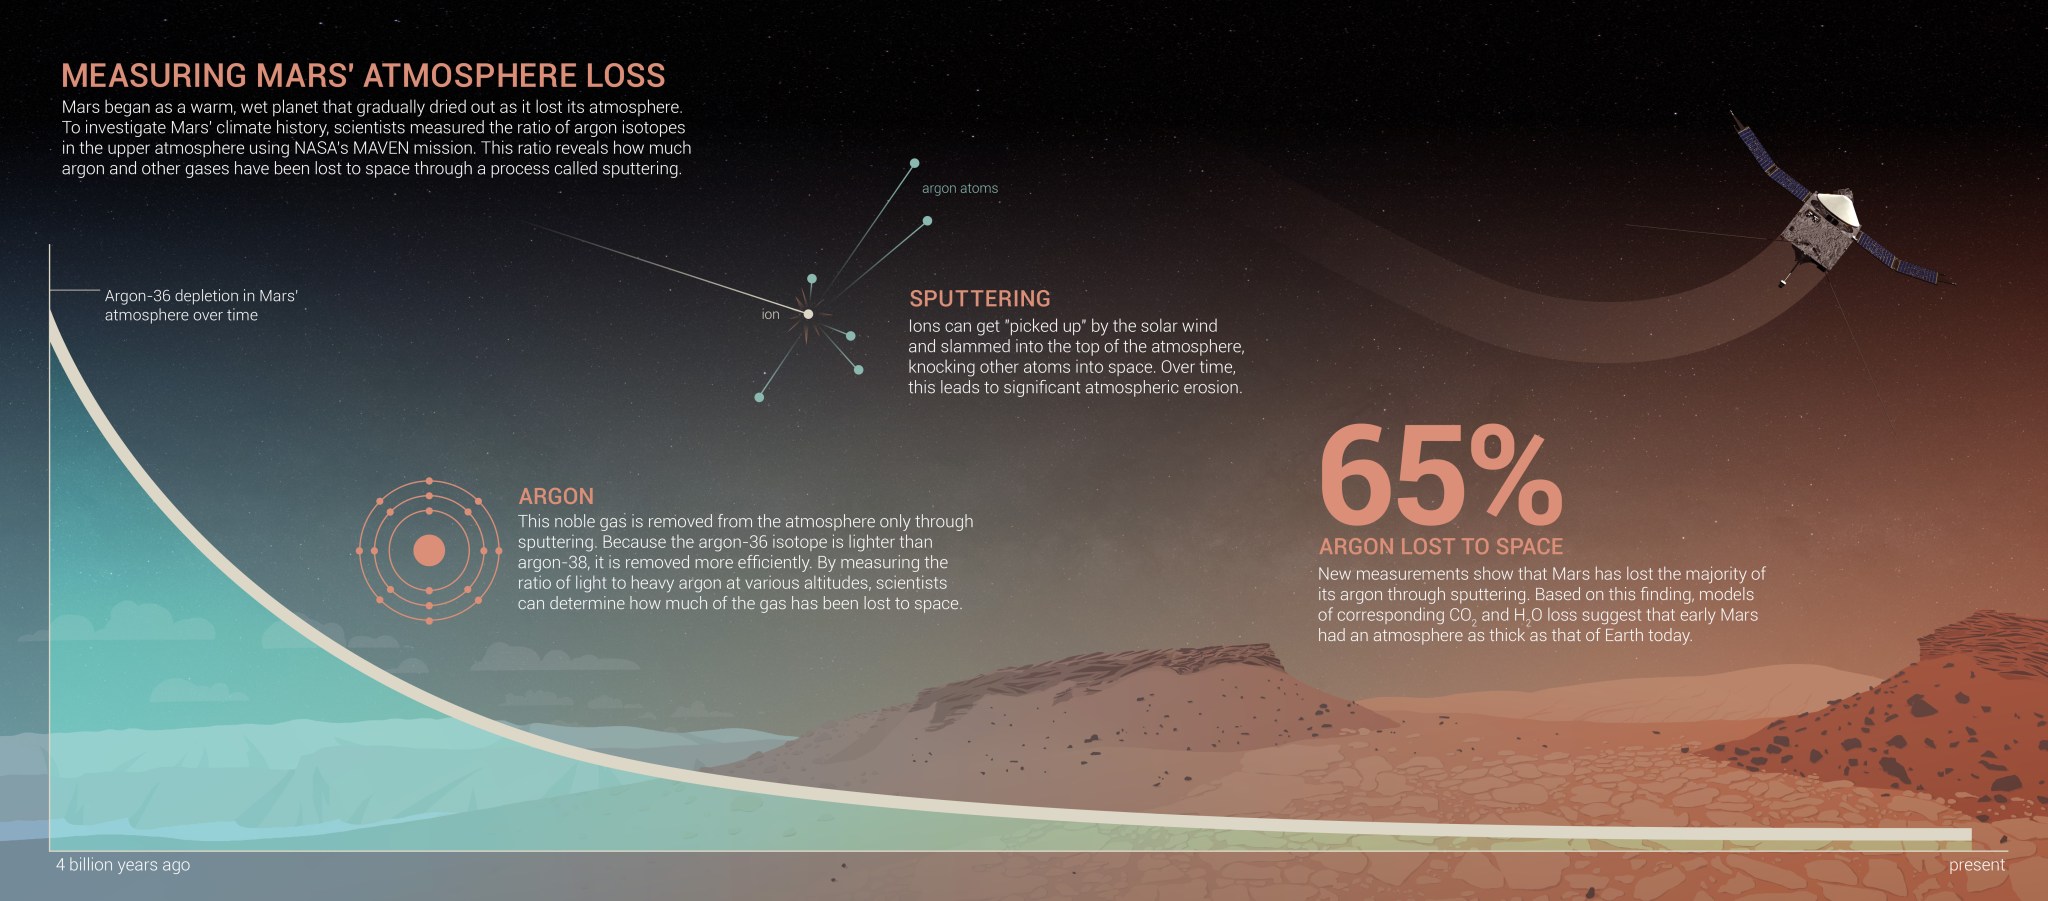 This infographic shows how Mars lost argon and other gasses over time due to ‘sputtering.’ Click to enlarge.